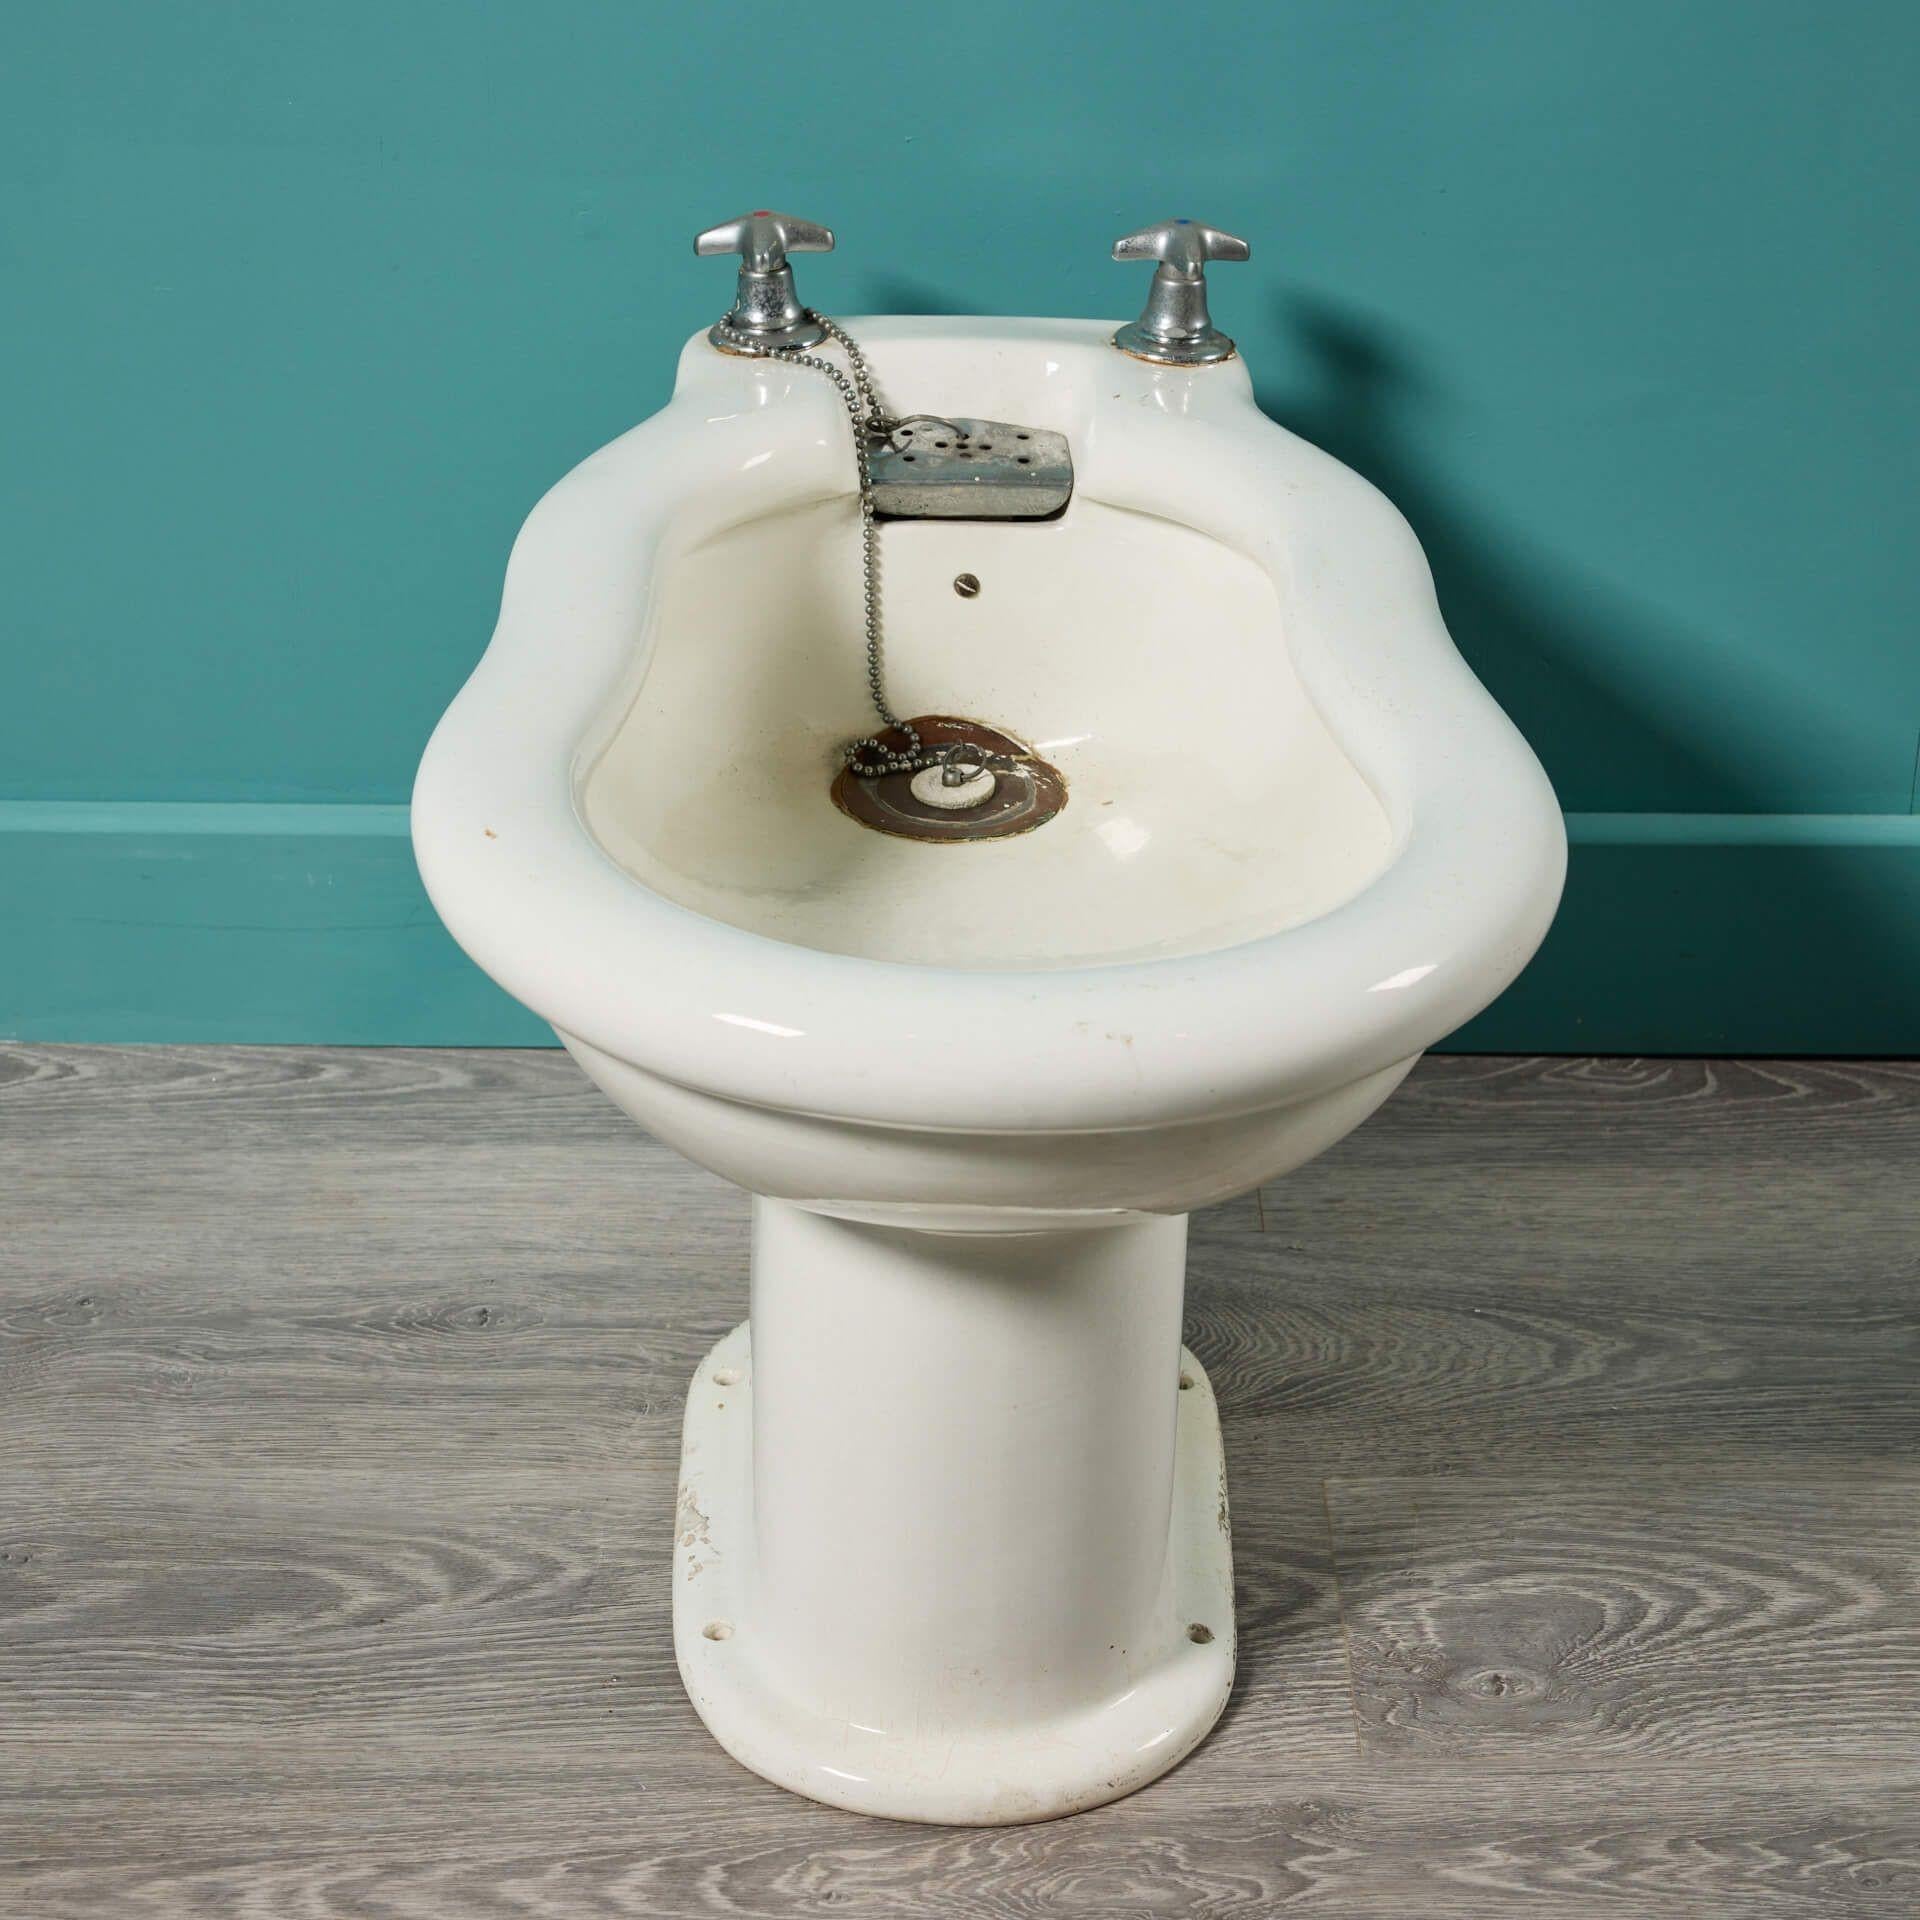 An antique French Edwardian porcelain bidet dating to circa 1920. This early 20th century piece has a smooth curved shape and crisp finish, which would make for a stylish addition to a bathroom in a contemporary or period property, such as a